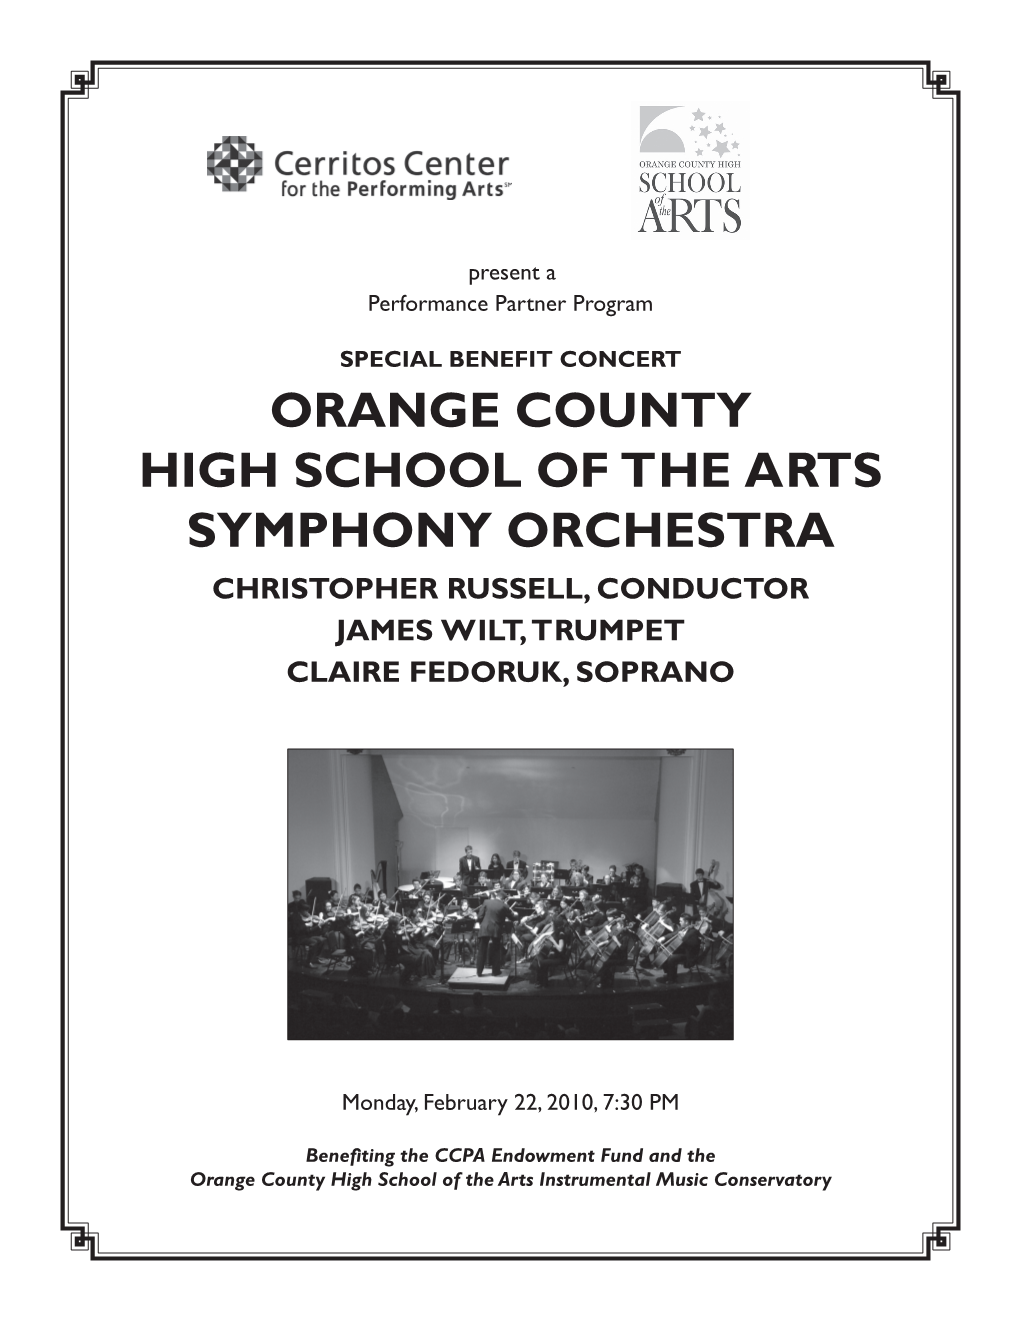 Orange County High School of the Arts Symphony Orchestra Christopher Russell, Conductor James Wilt, Trumpet Claire Fedoruk, Soprano